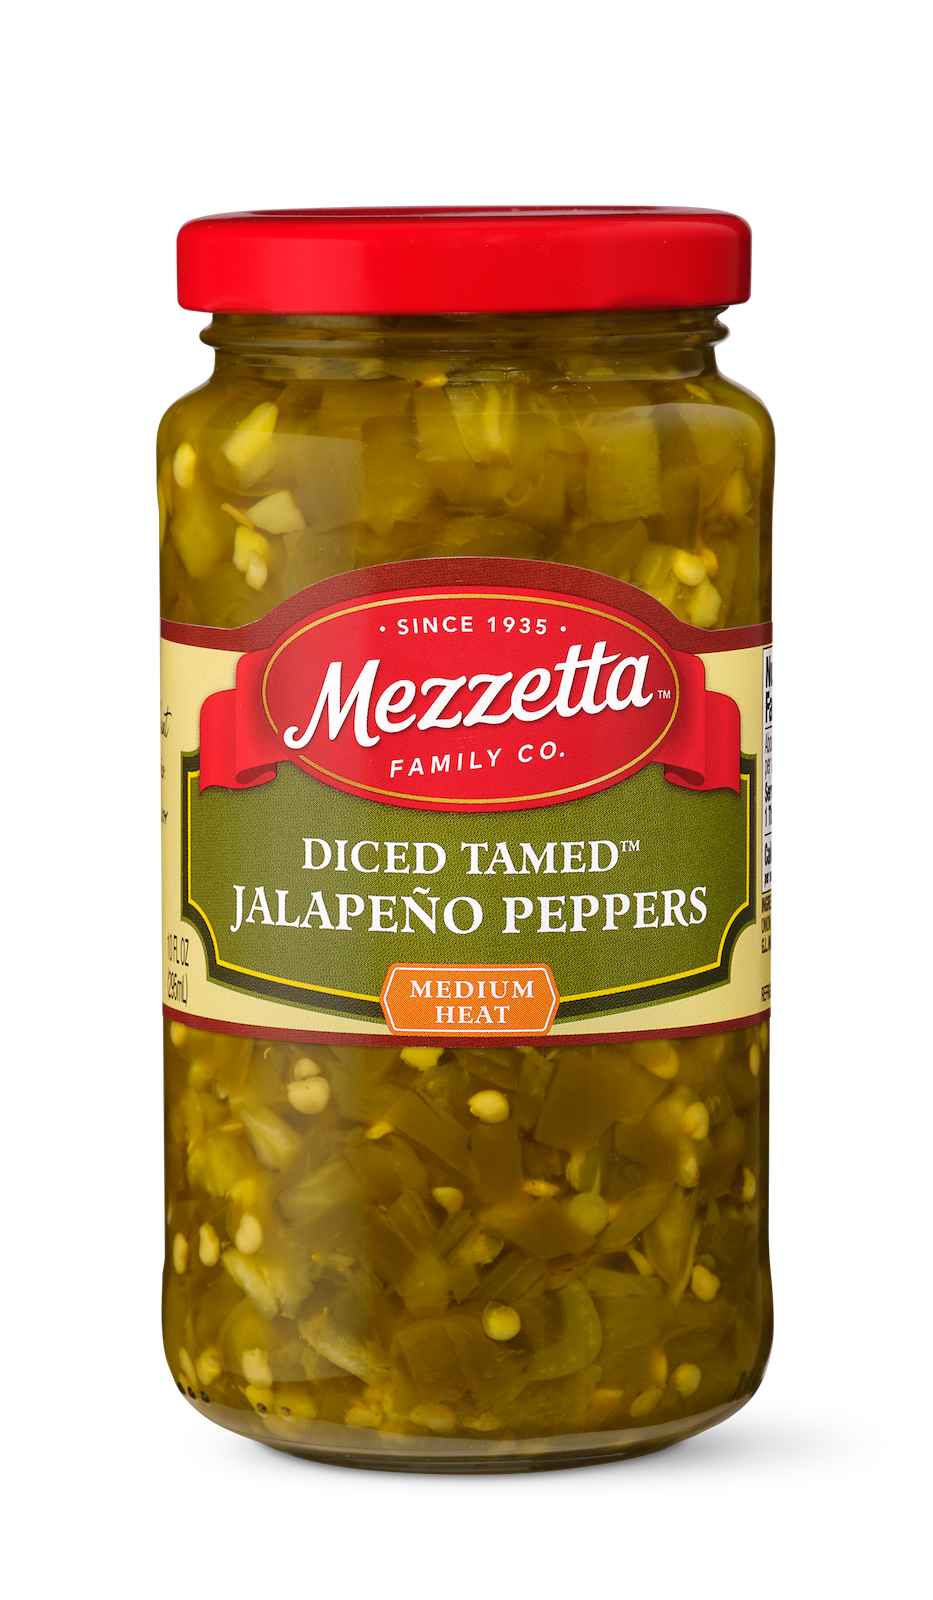 Diced Tamed™ Jalapeño Peppers